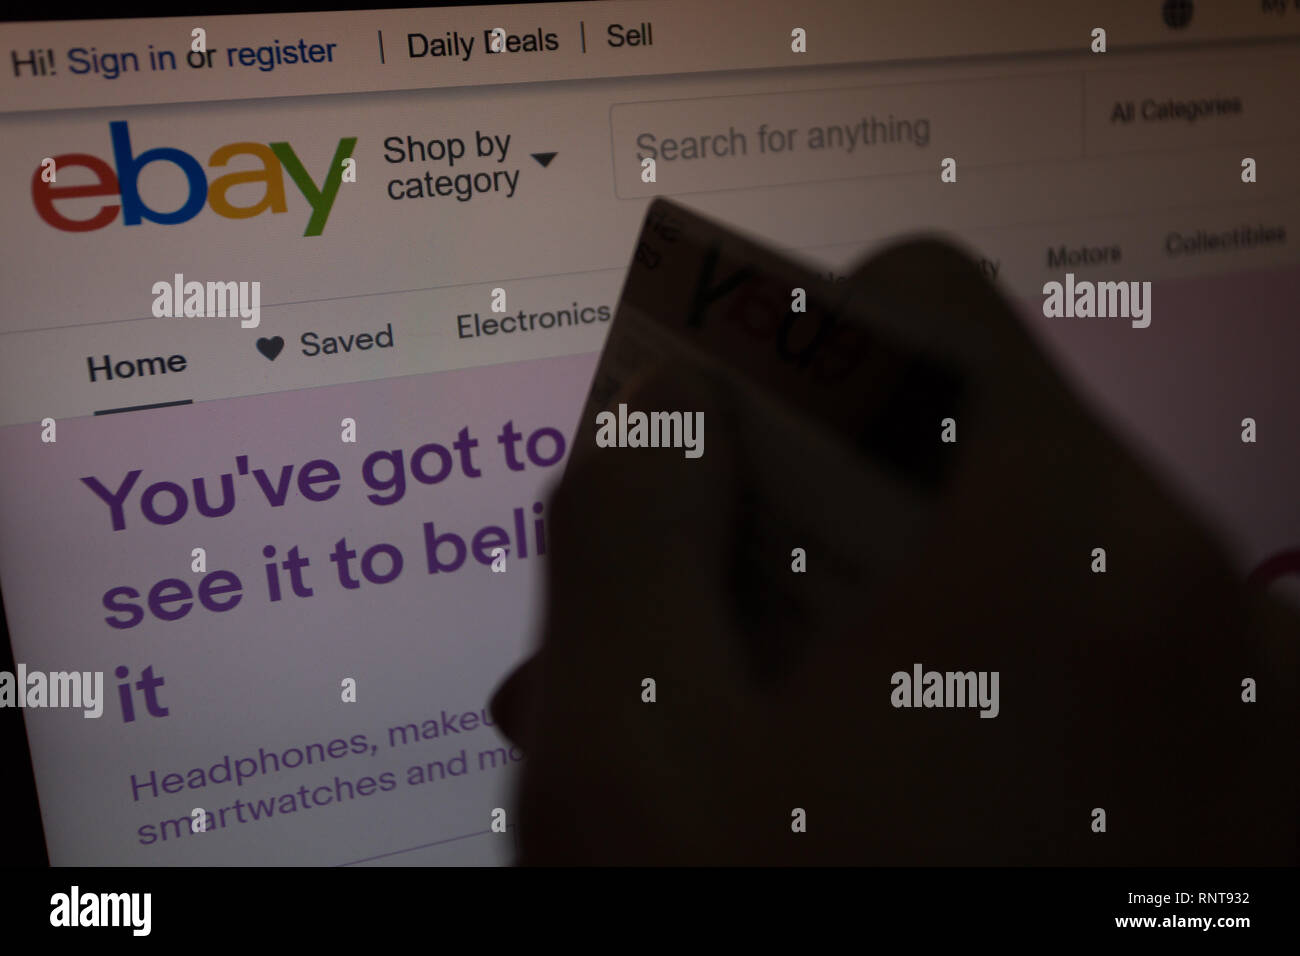 eBay logo on its website is shown on laptop computer screen, hand holding credit debit card unfocused on foreground, online shoppers, purchases Stock Photo